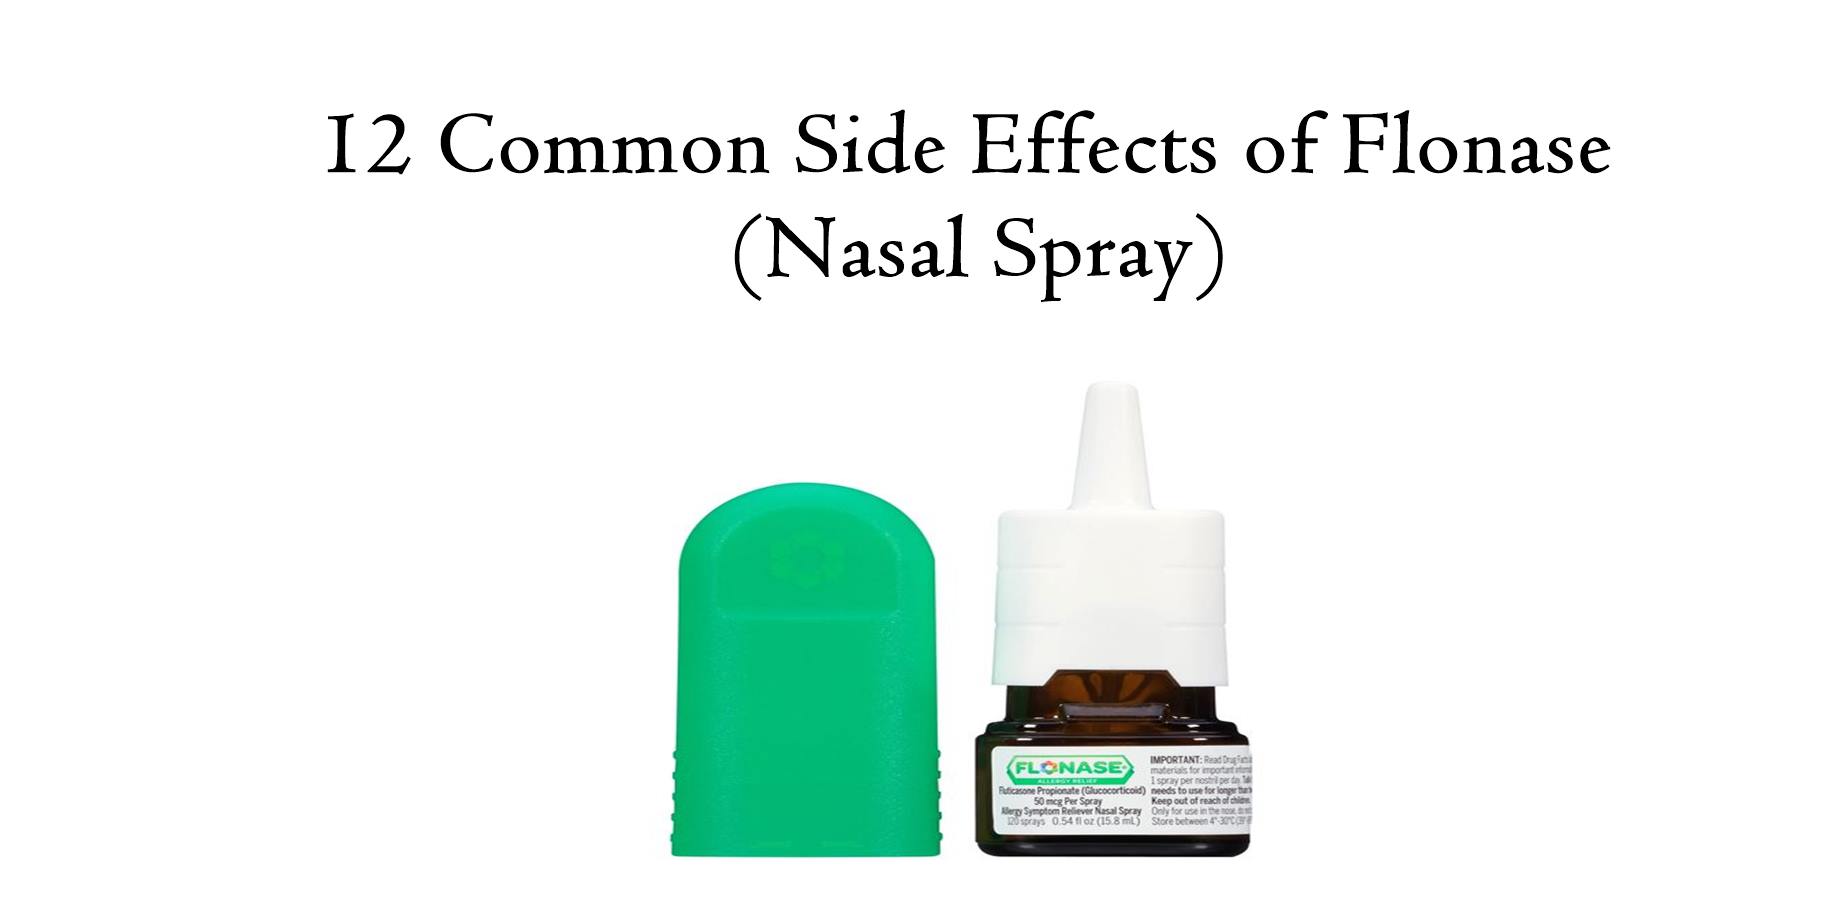 12 Common Side effects of Flonase (Nasal Spray)